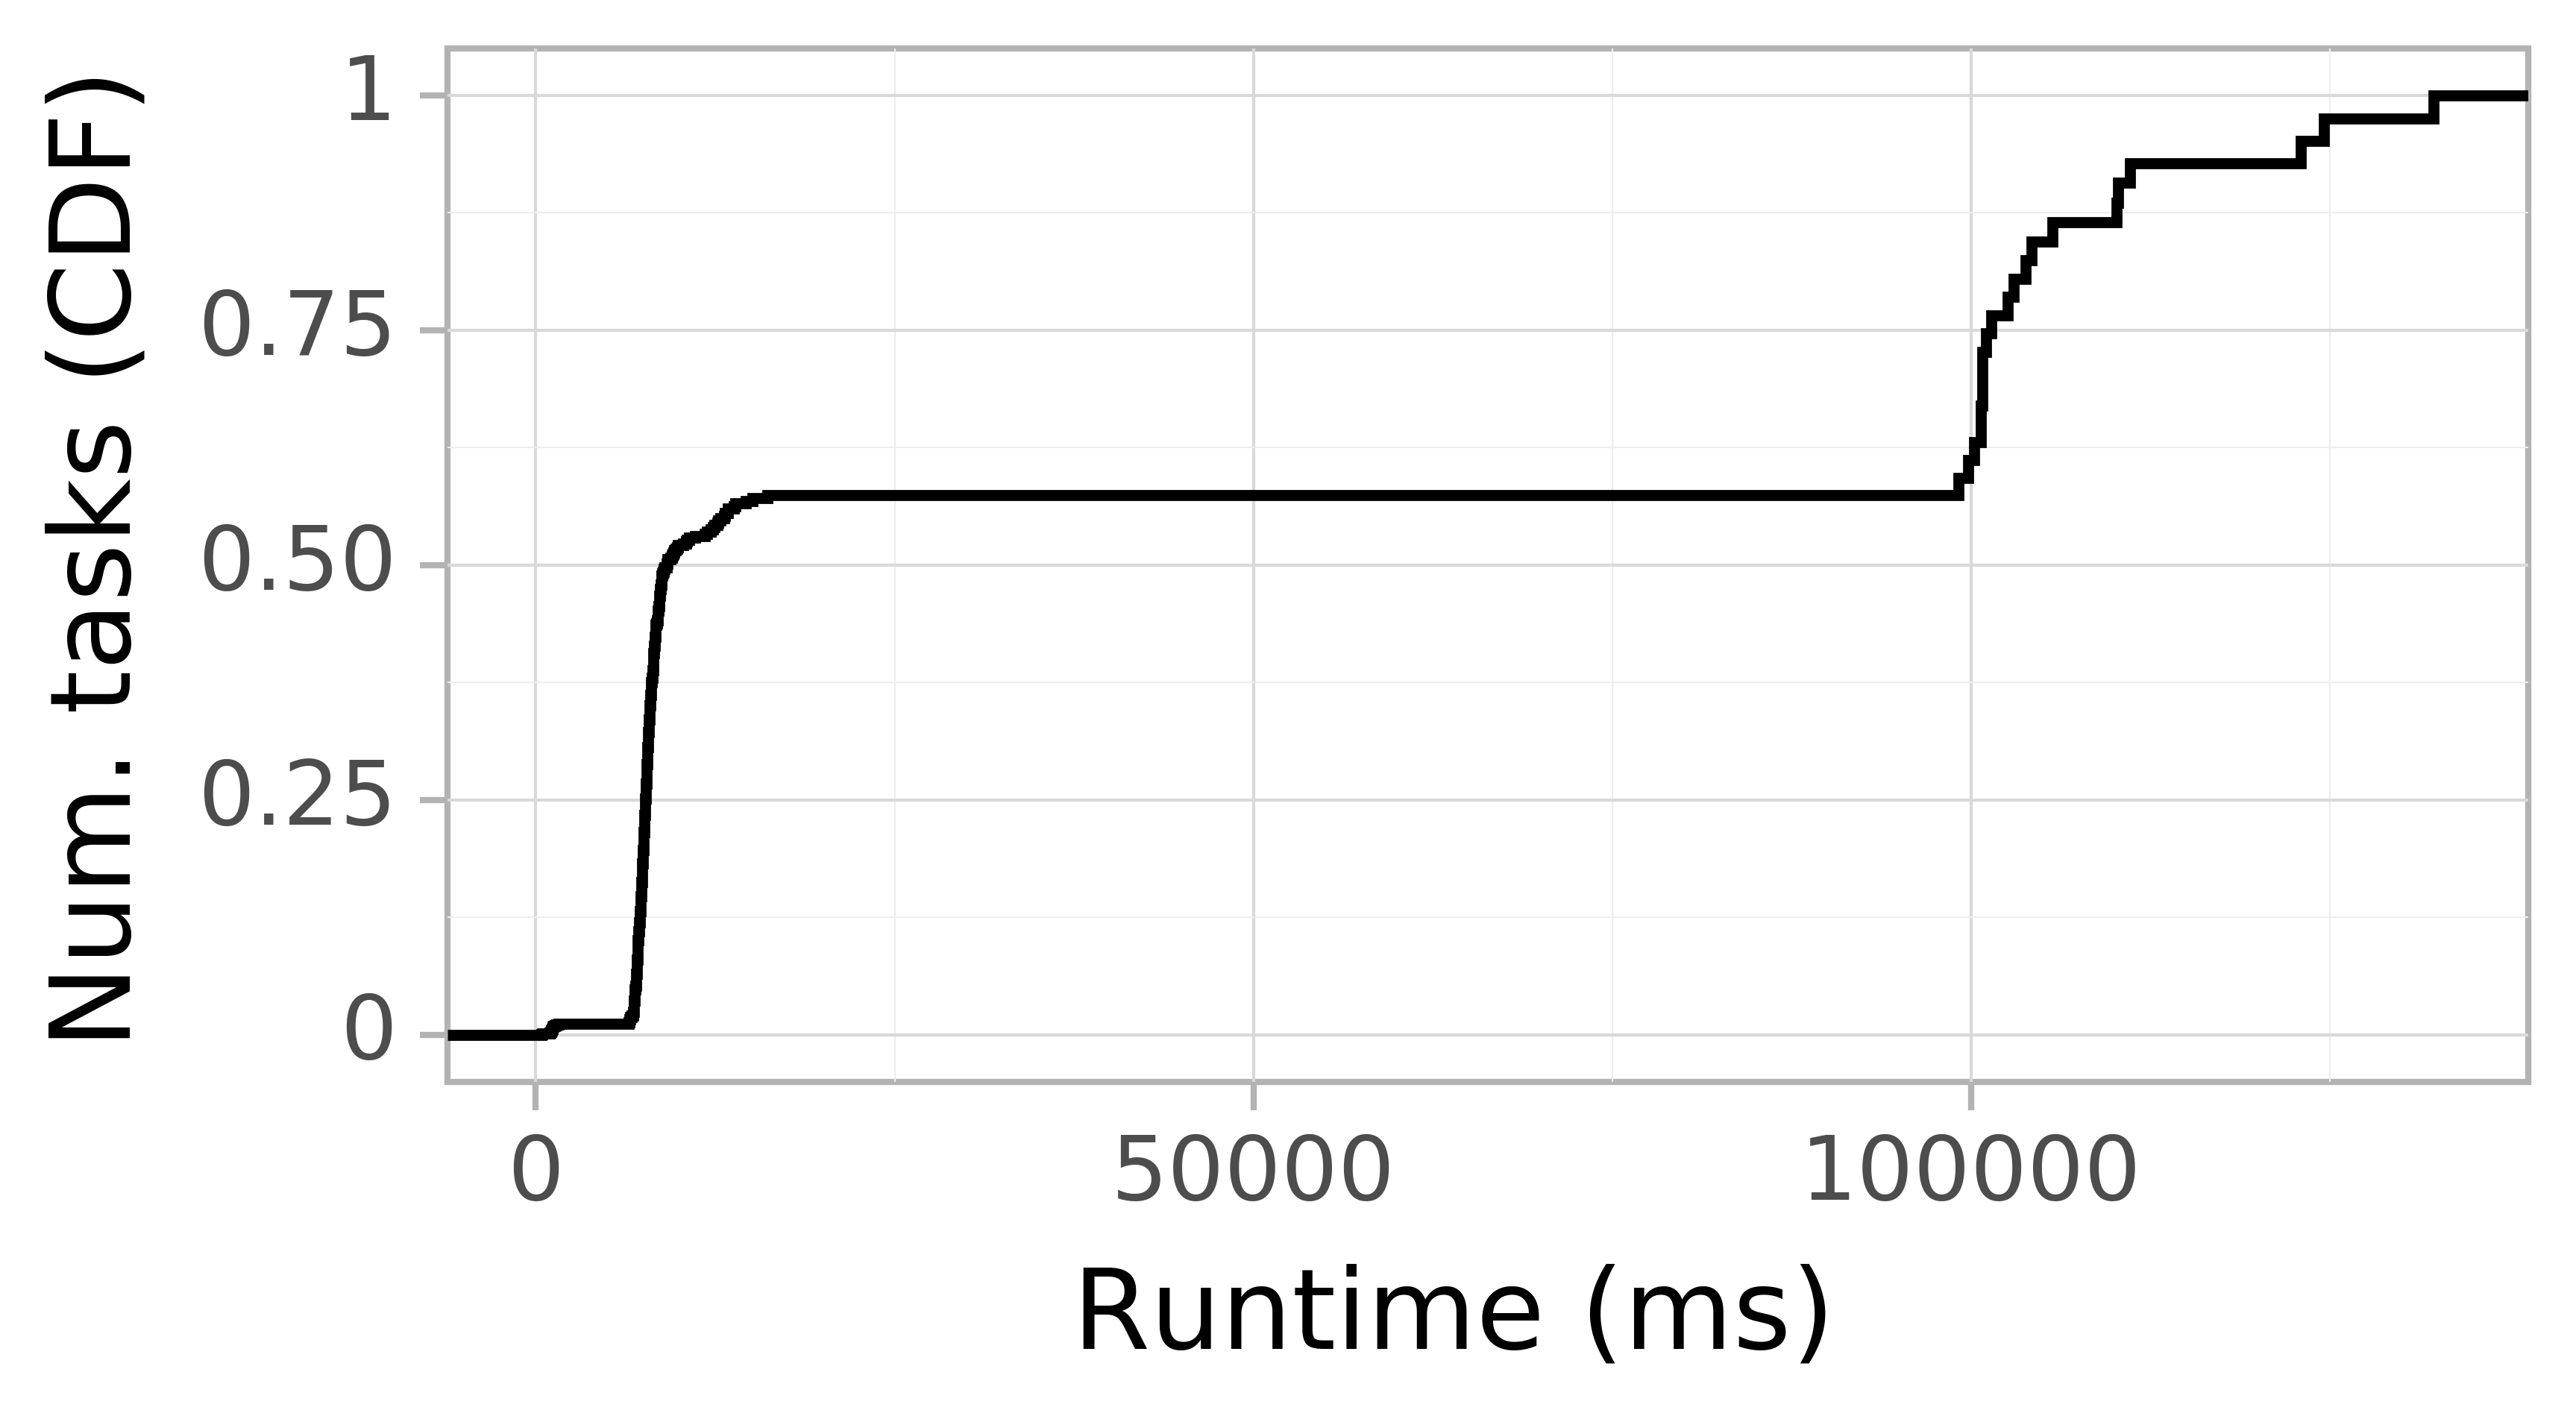 Task runtime CDF graph for the askalon-new_ee32 trace.